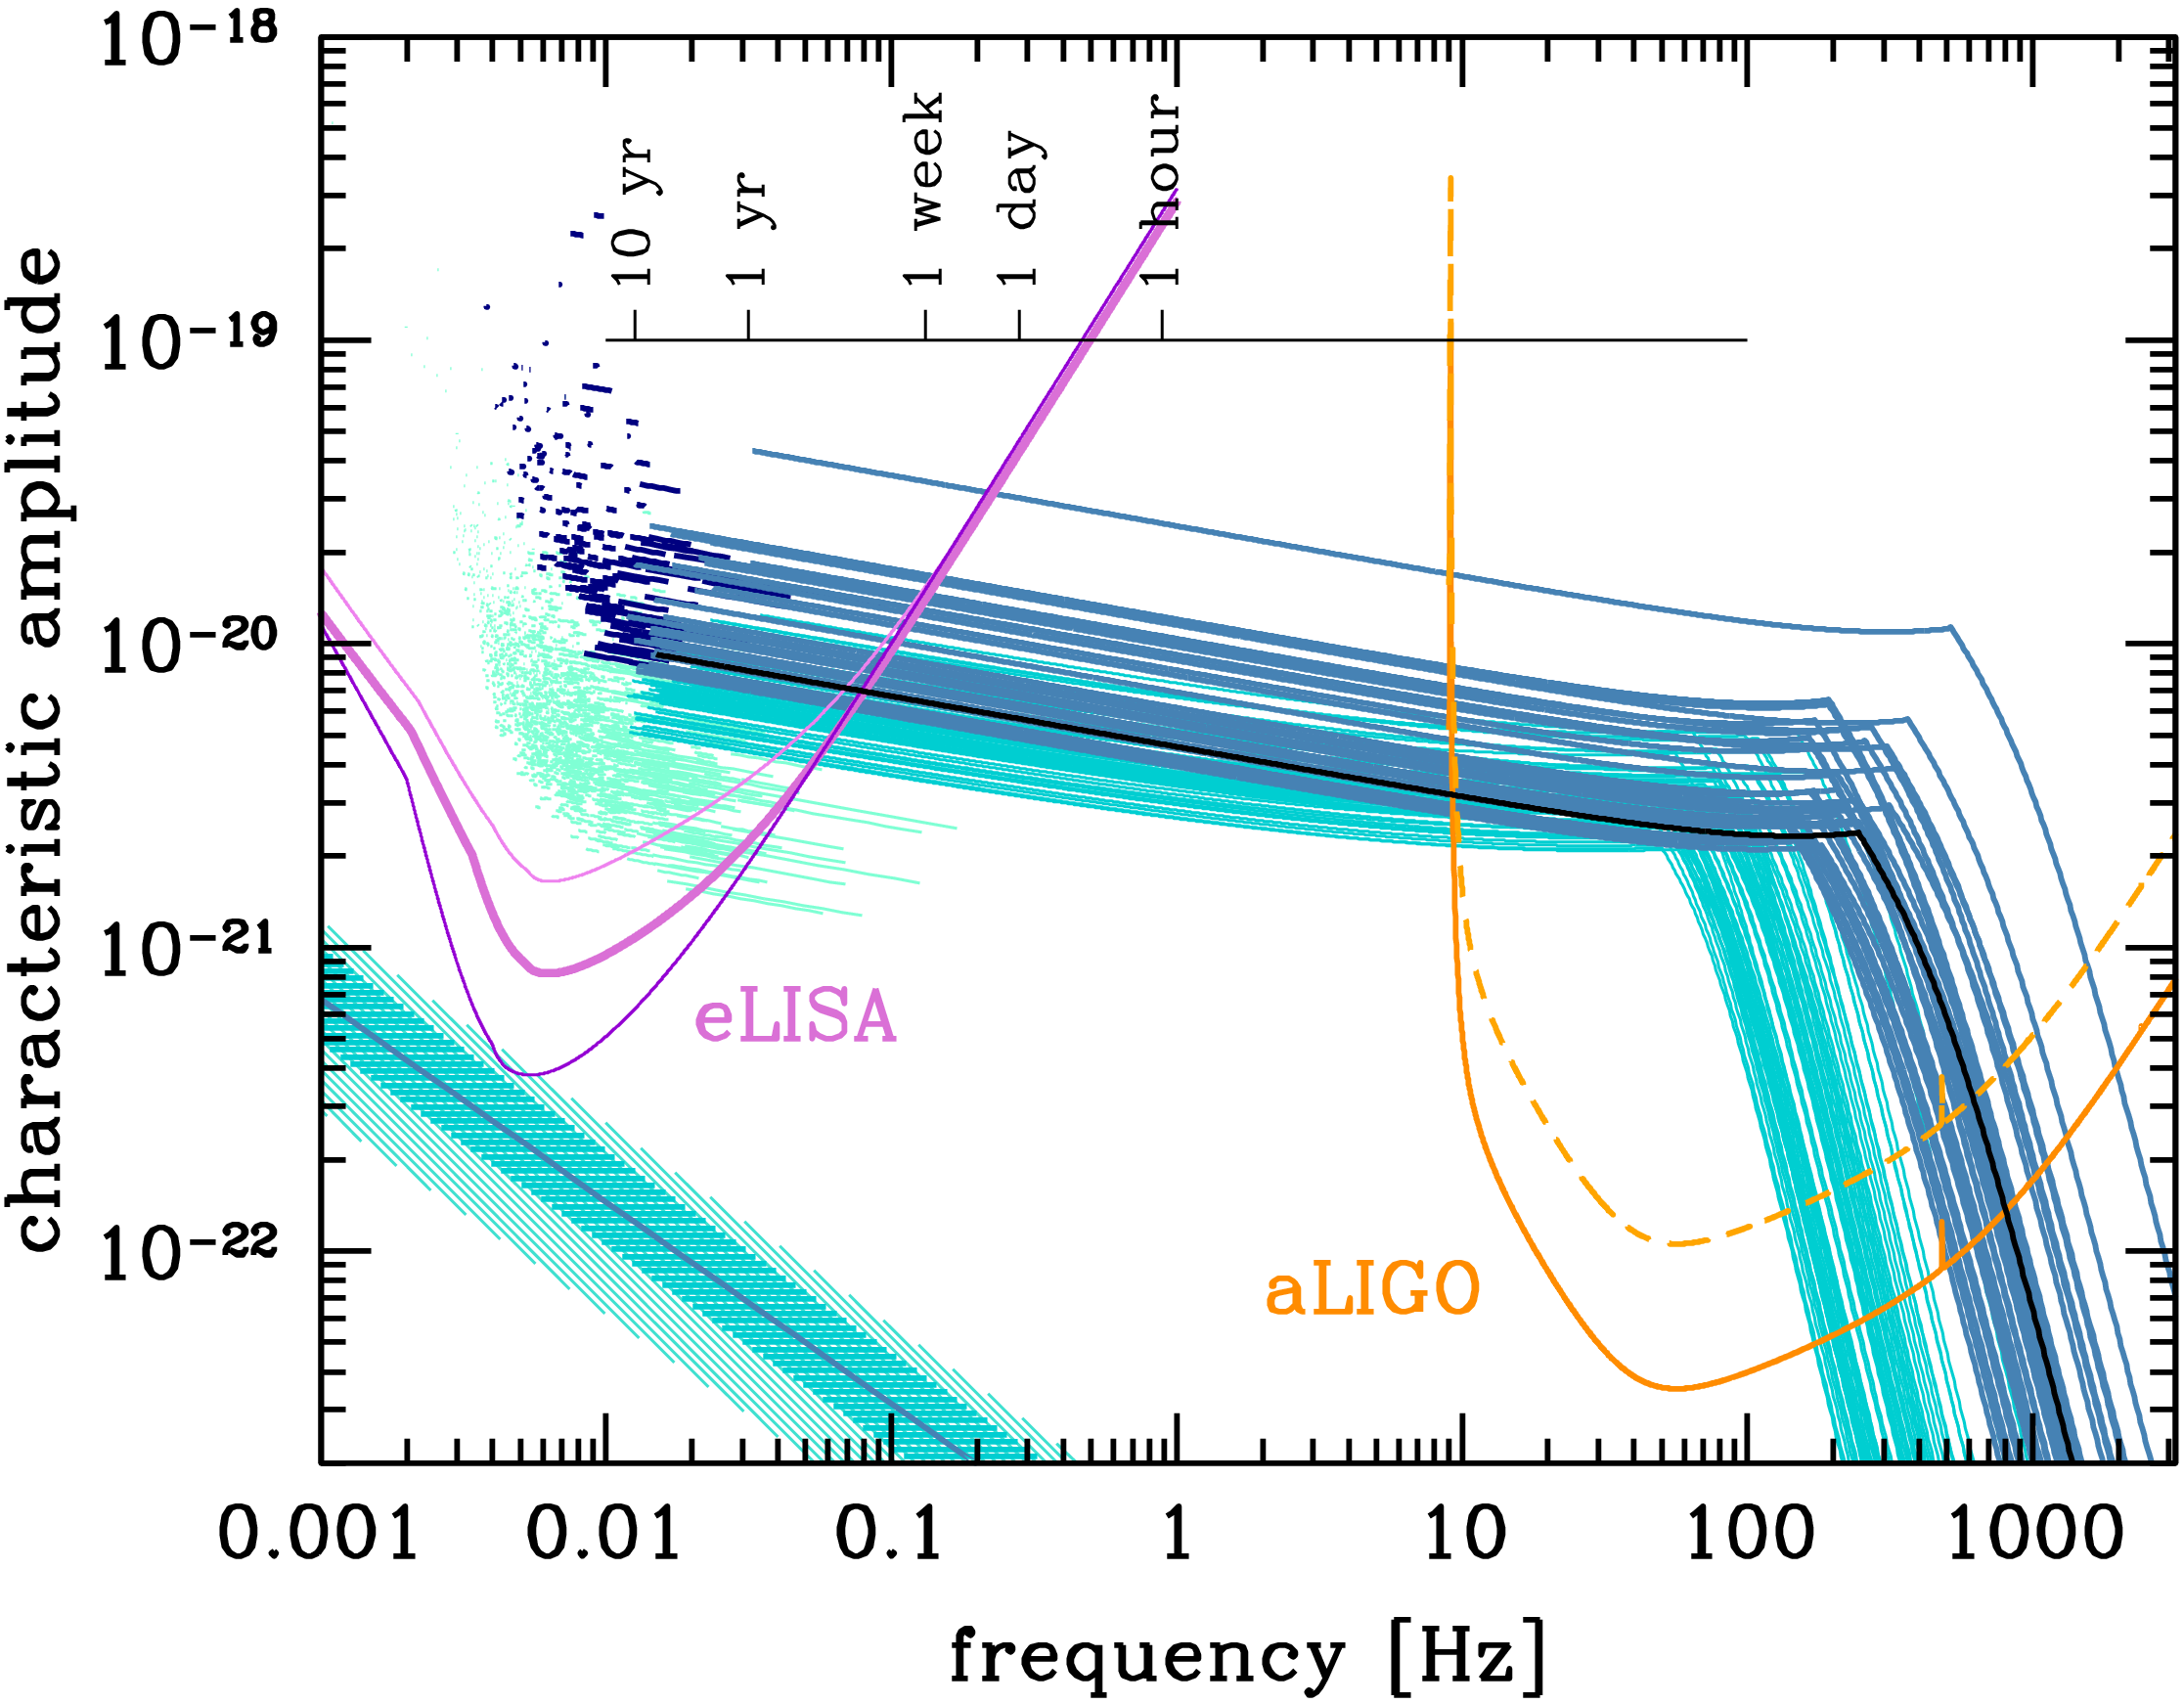 Multi-band gravitational-wave astronomy and the evolution of binary black holes